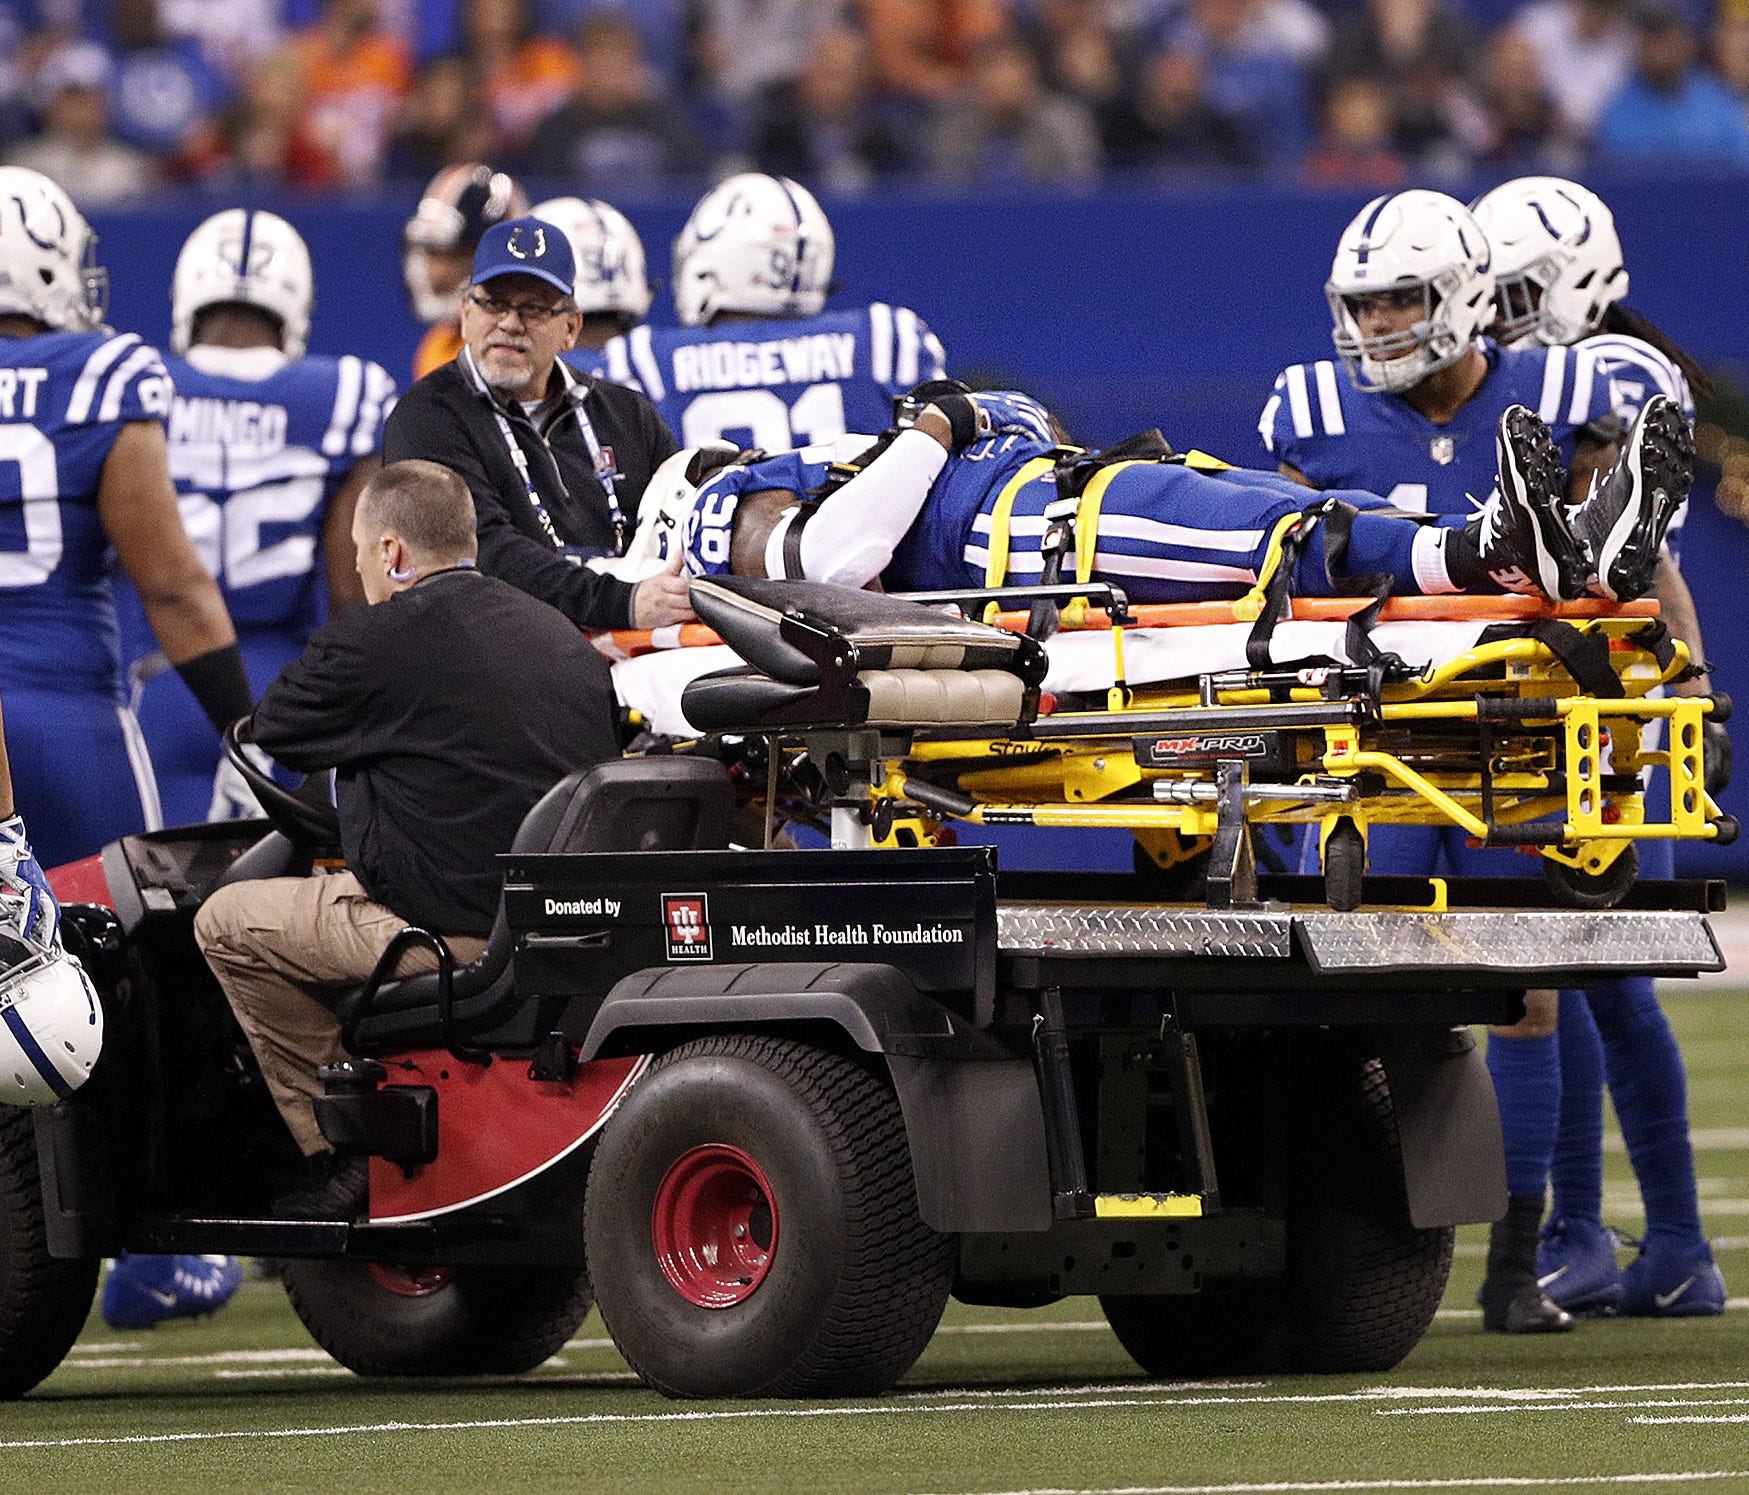 Indianapolis Colts tight end Brandon Williams is tended to by the Colts medical staff in the first half of their game against the Denver Broncos at Lucas Oil Stadium Thursday, Dec 14, 2017.